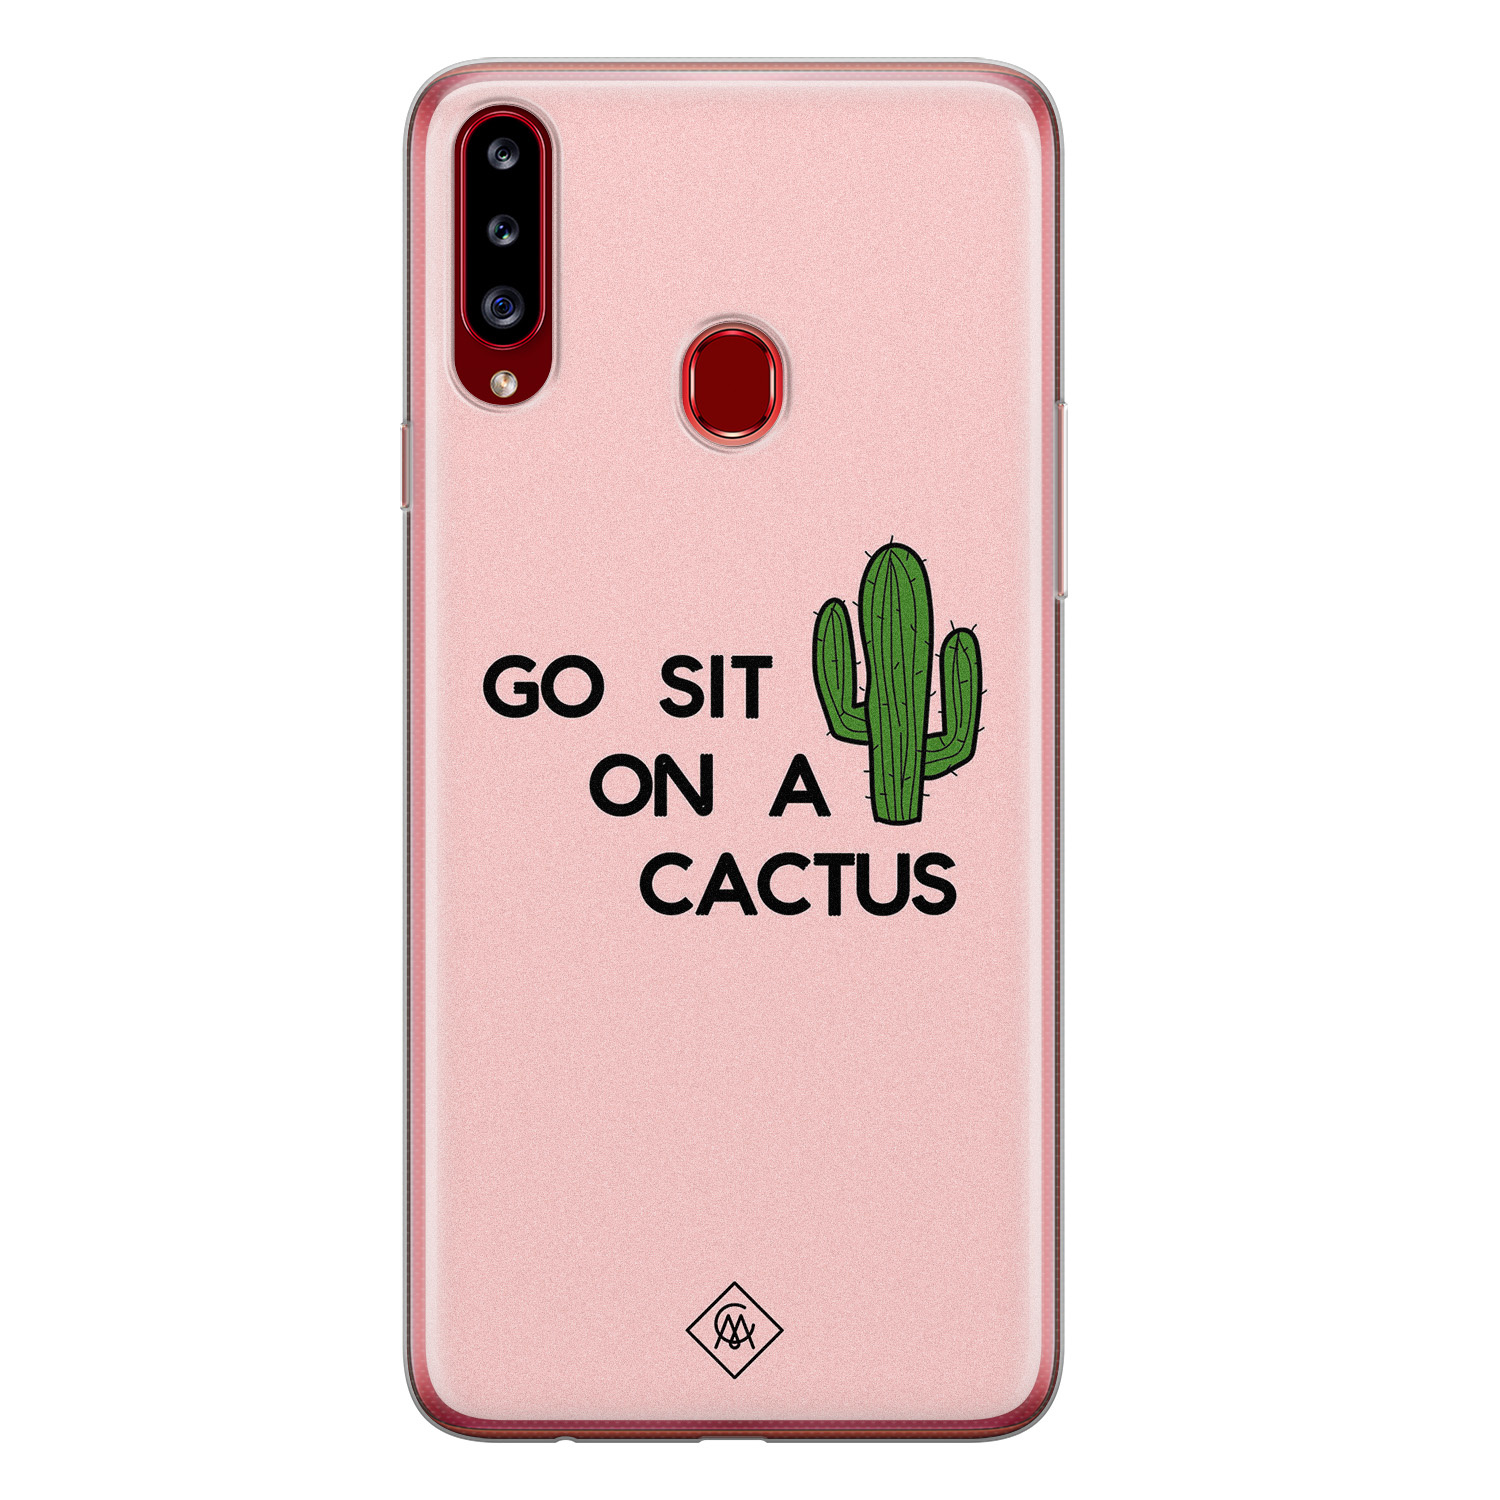 Samsung Galaxy A20s siliconen hoesje - Go sit on a cactus